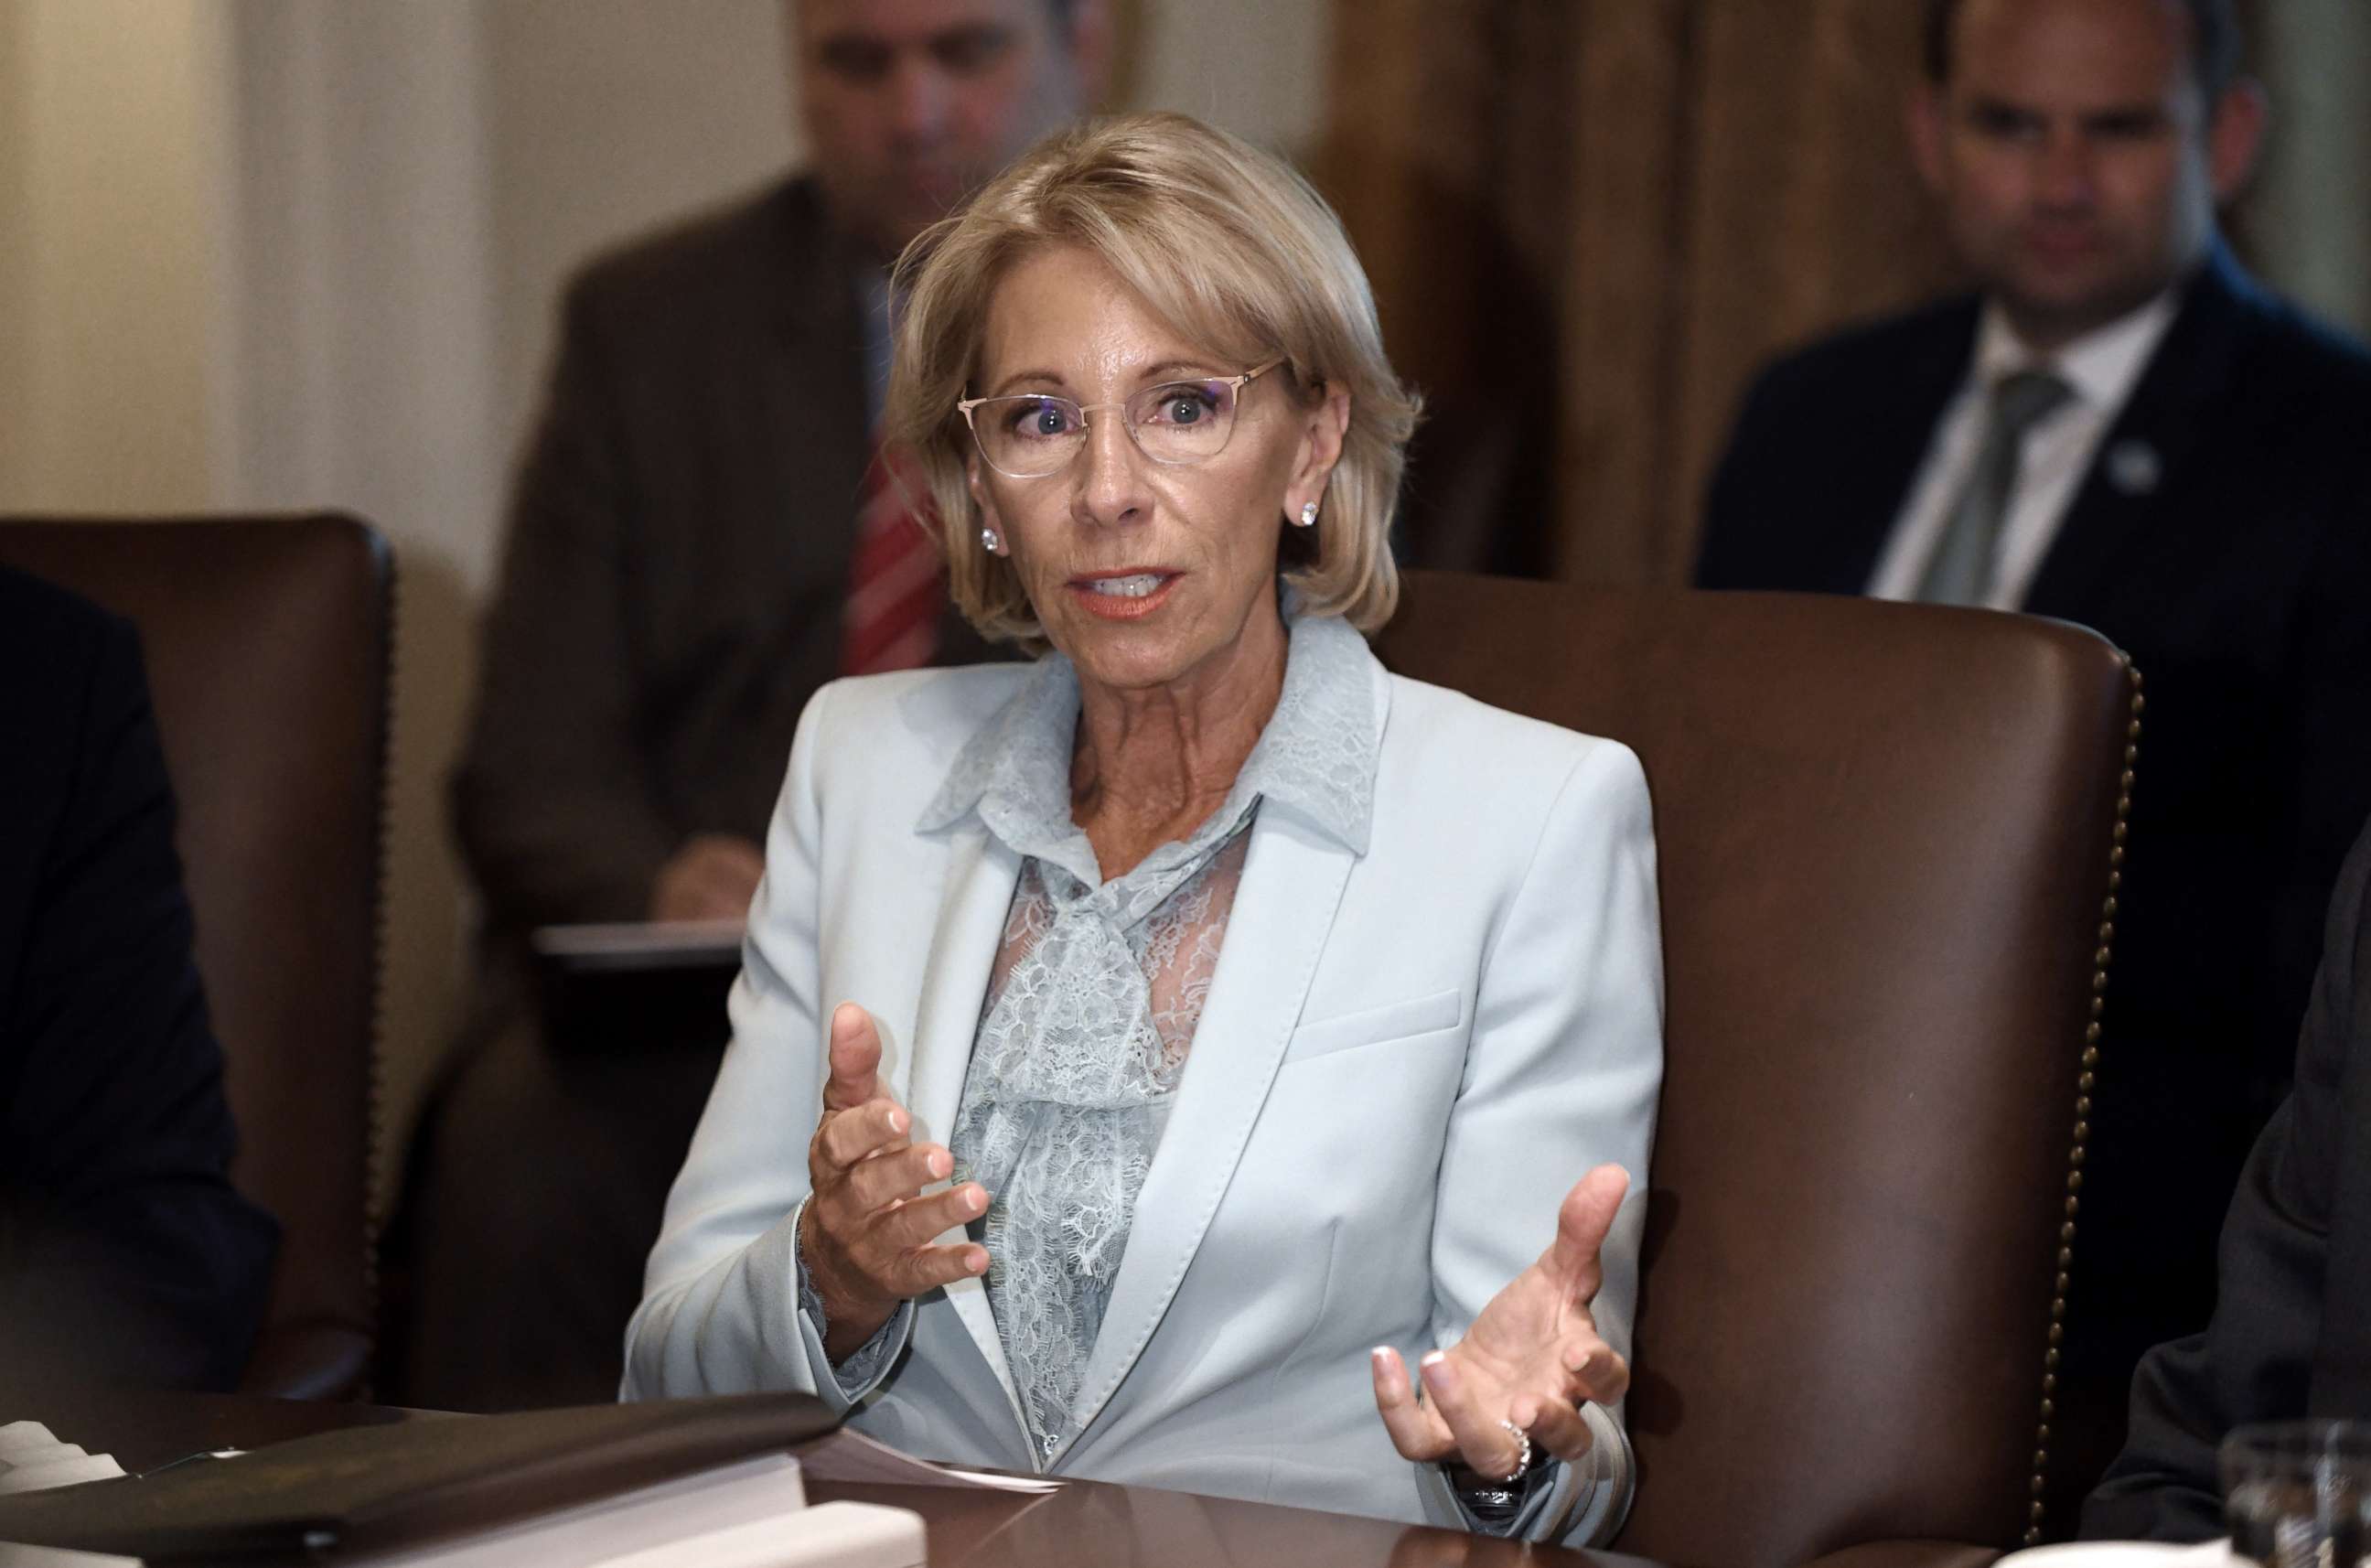 PHOTO: Secretary of Education Betsy DeVos speaks during a cabinet meeting with President Donald Trump in the Cabinet Room of the White House, July 18, 2018 in Washington.